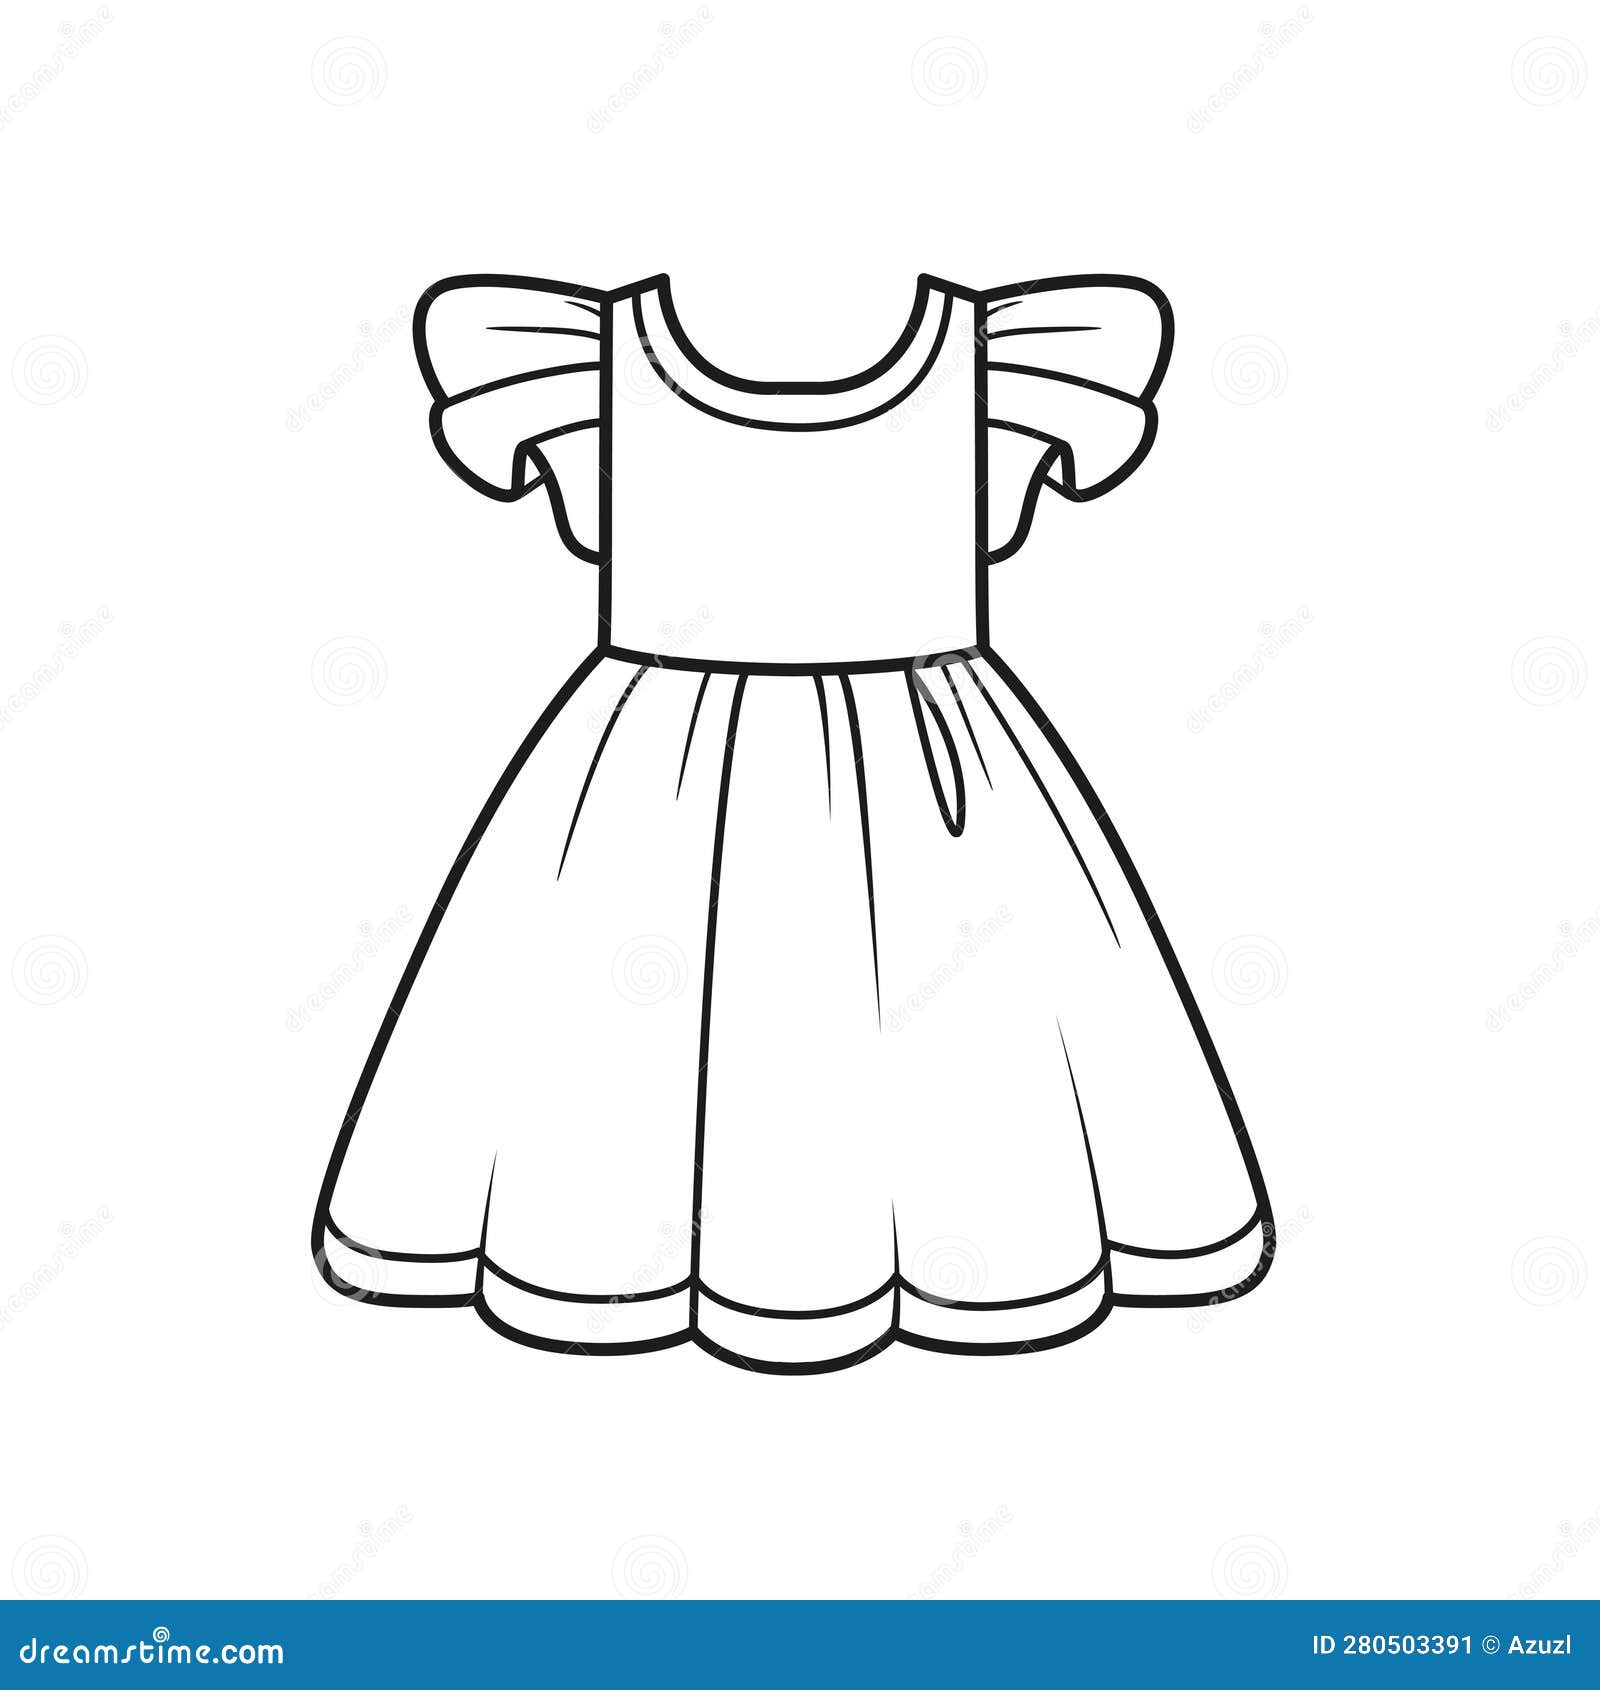 Beautiful Dress Outline for Coloring Page on a White Stock Vector ...